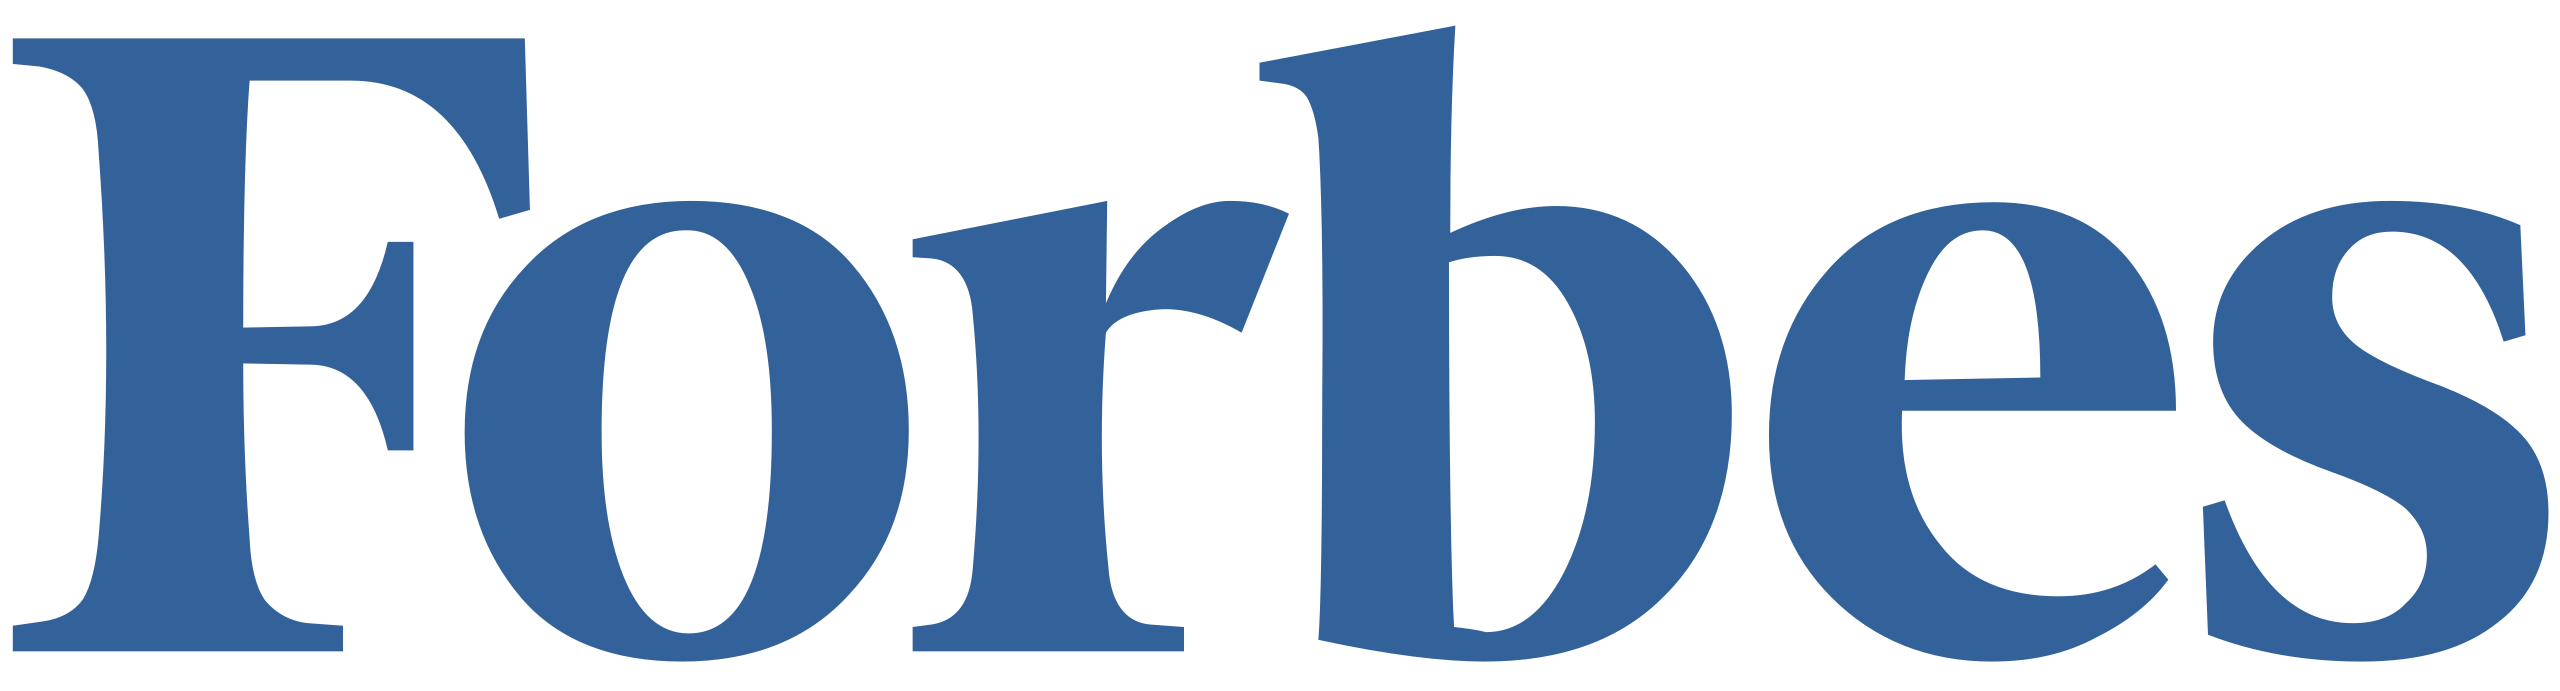 2560px-Forbes_logo.svg.png